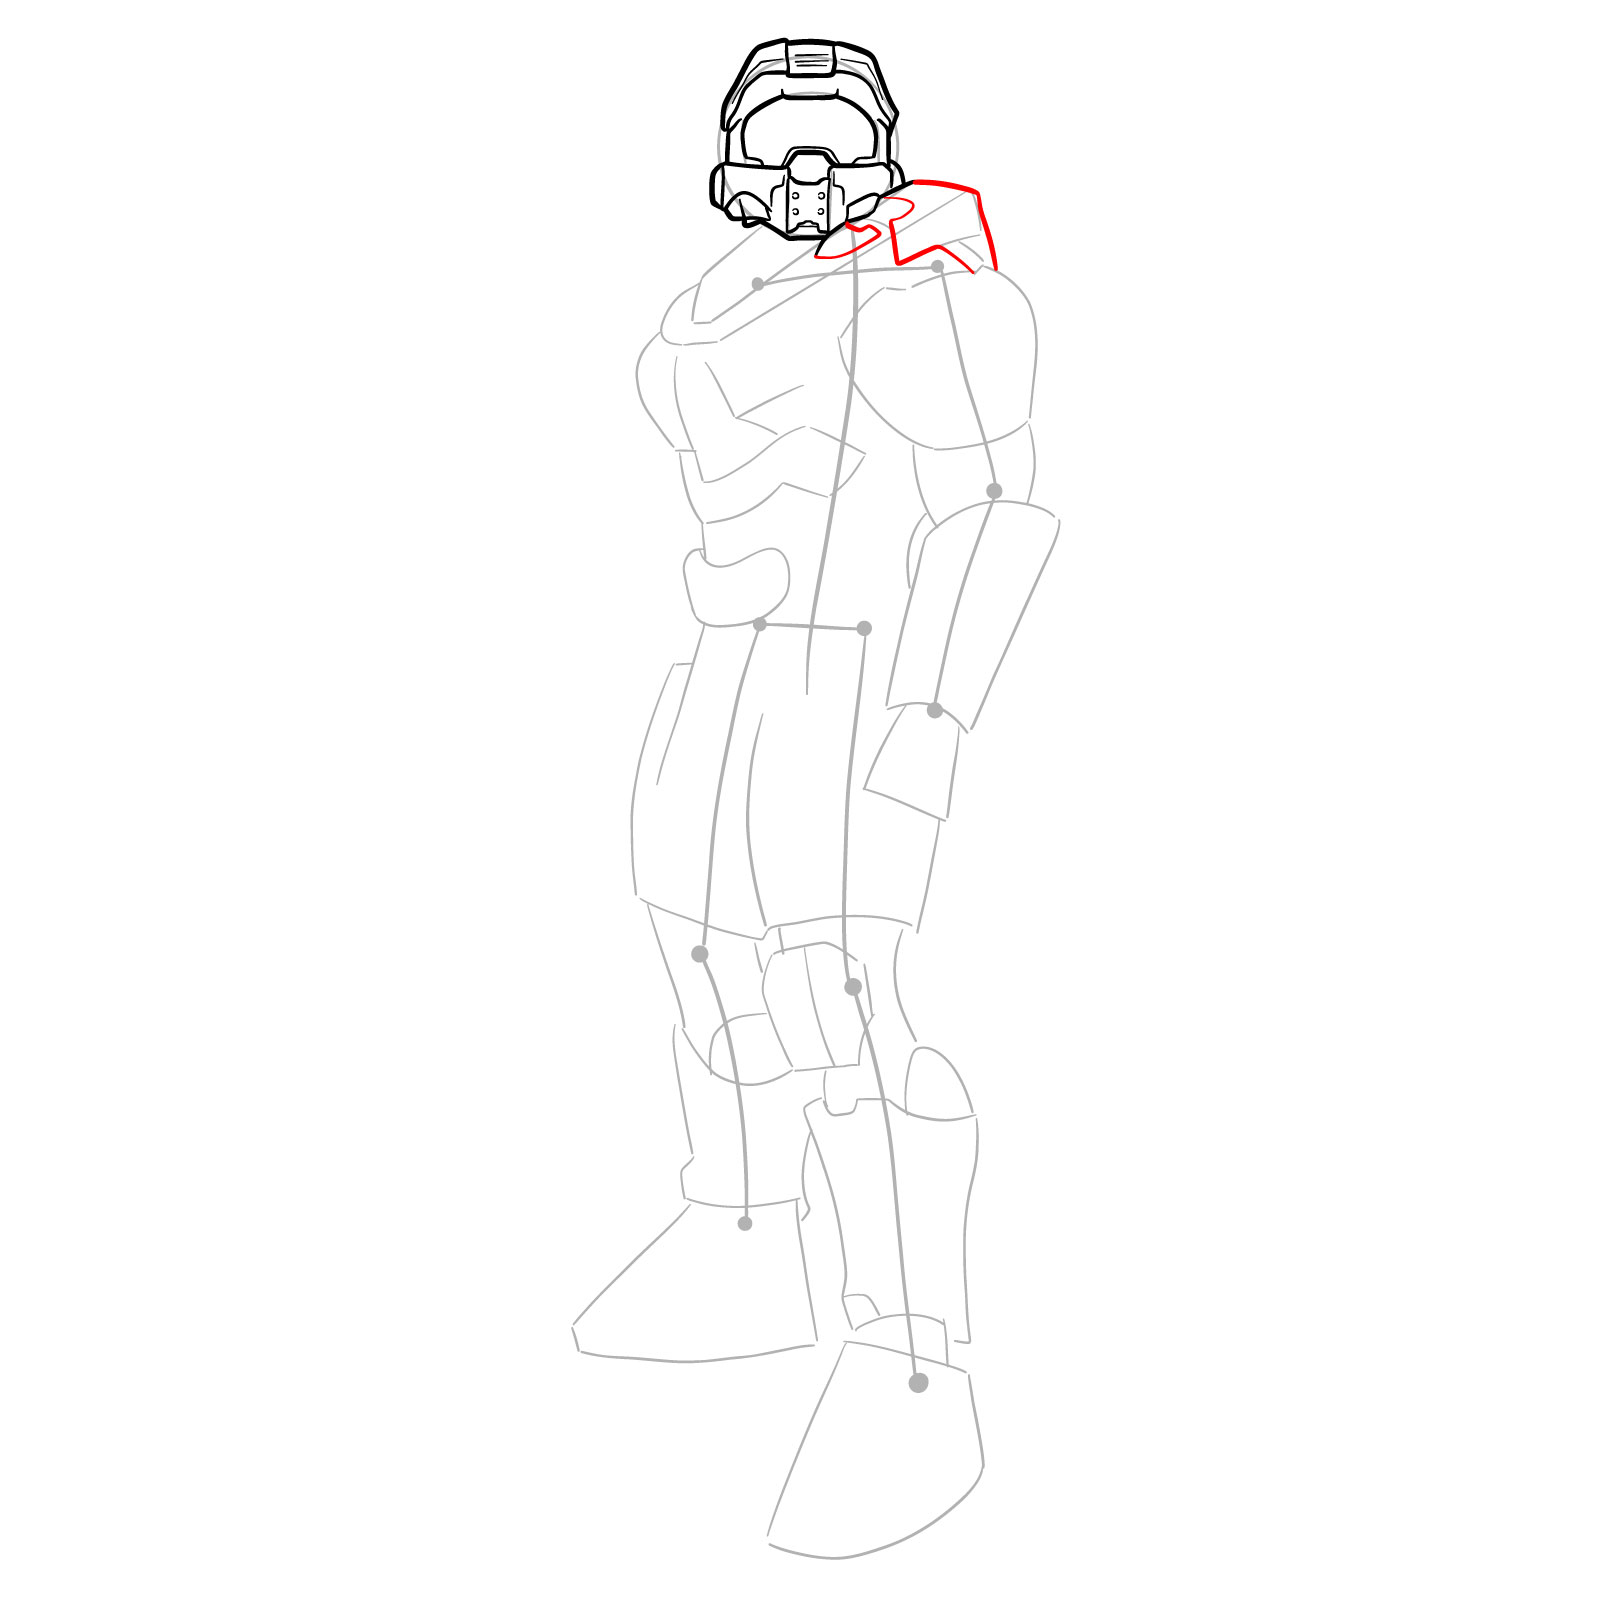 How to Draw Master Chief Petty Officer John-117 - step 11